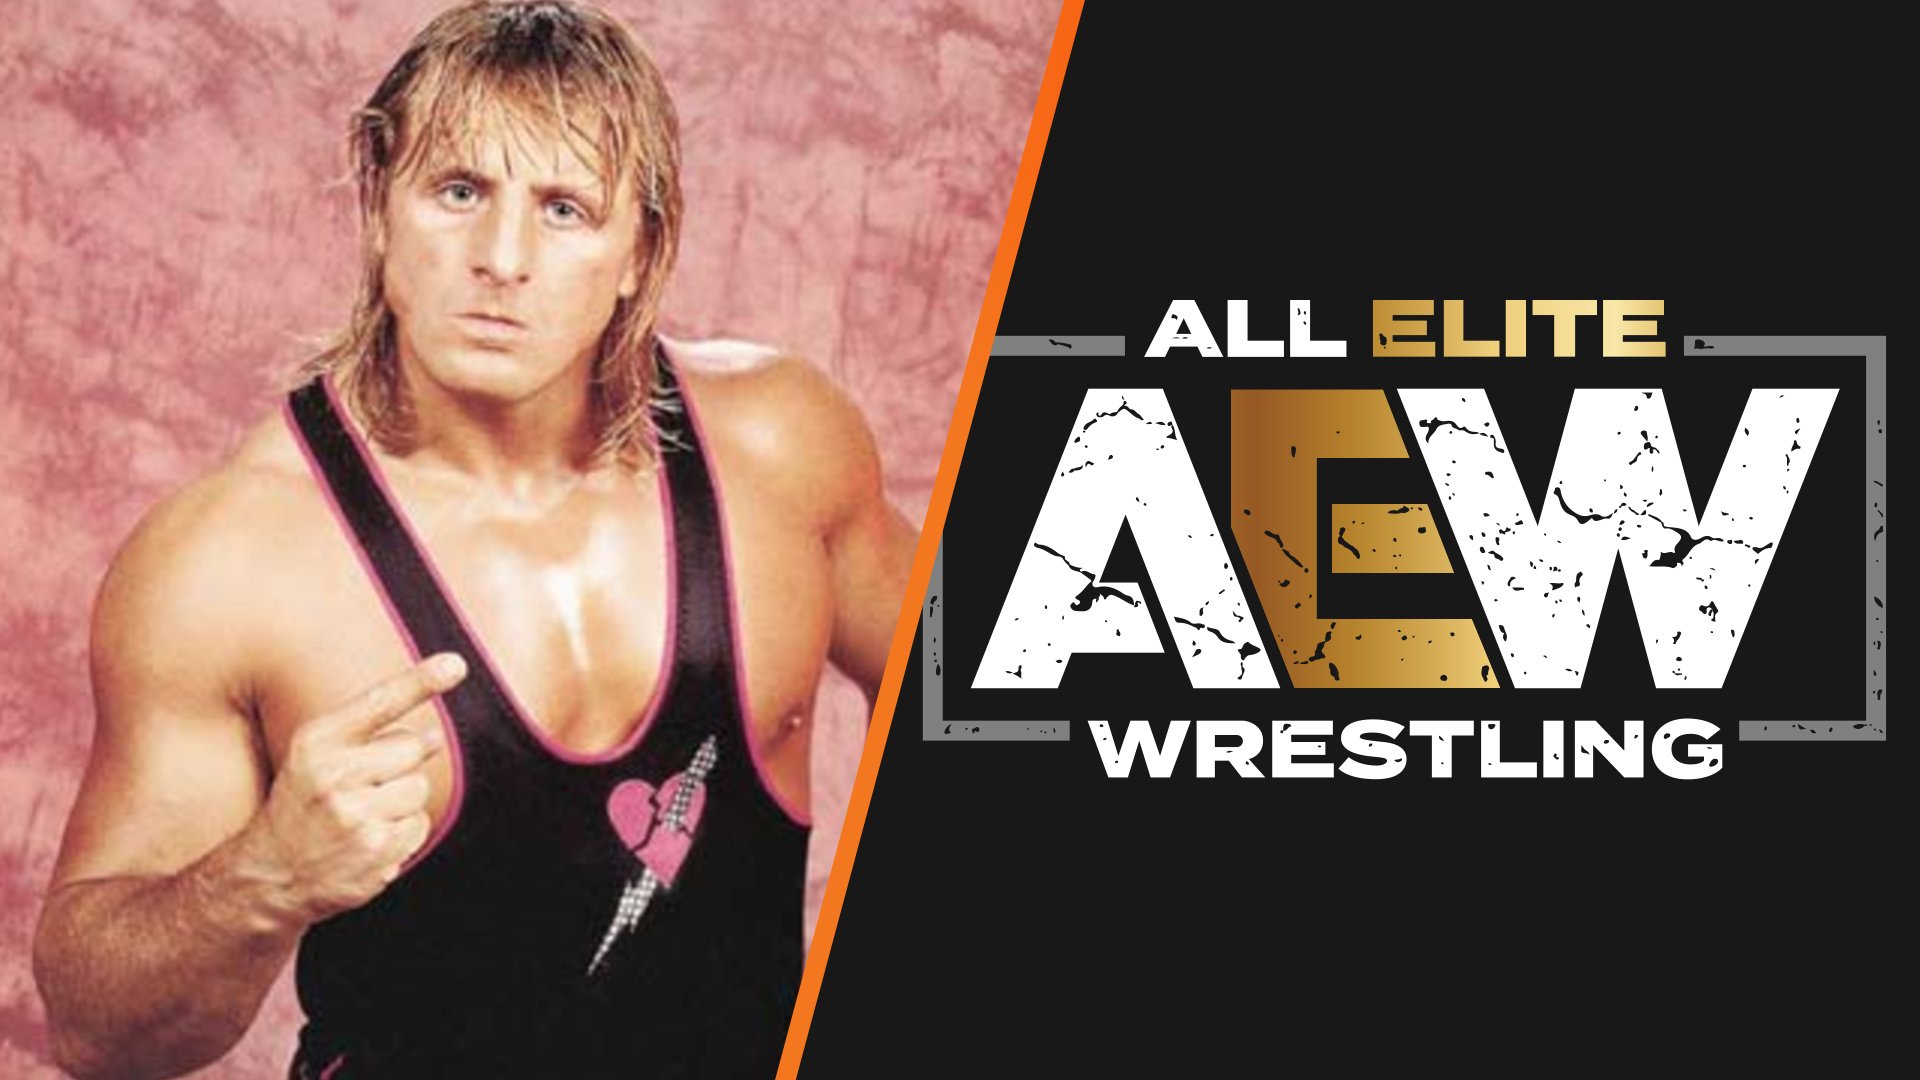 Owen Hart will appear in AEW, his first video game in nearly 20